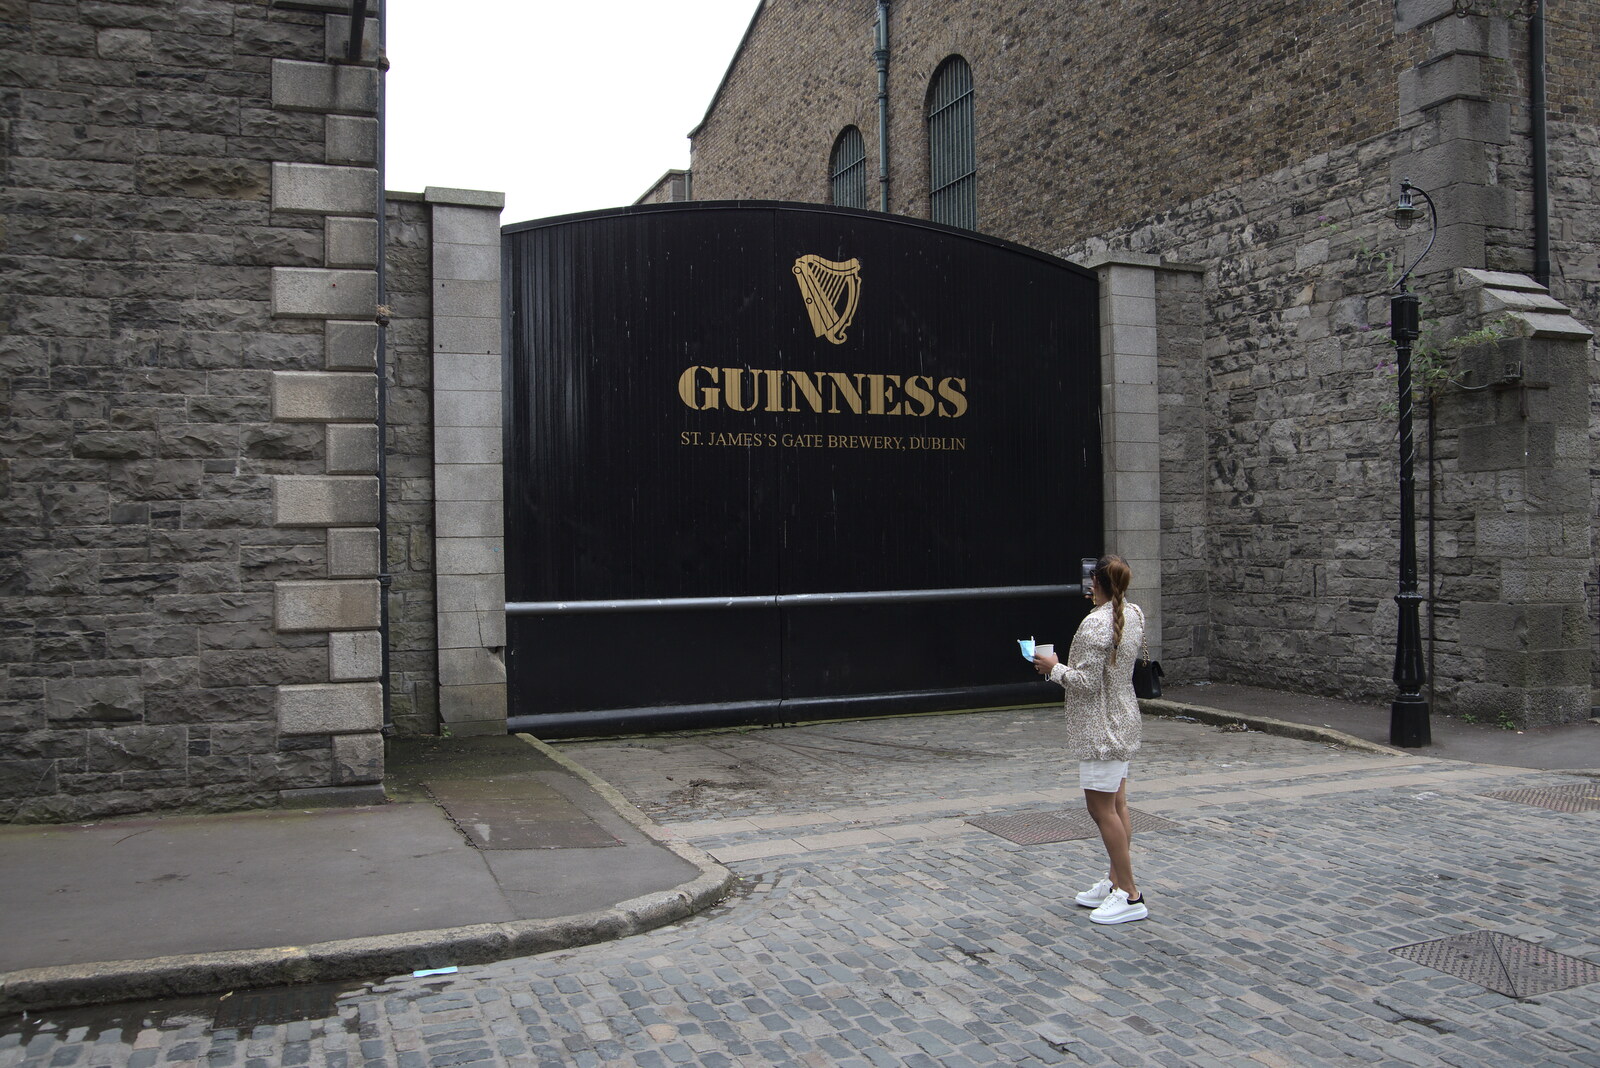 One of the Guinness factory gates from The Guinness Storehouse Tour, St. James's Gate, Dublin, Ireland - 17th August 2021